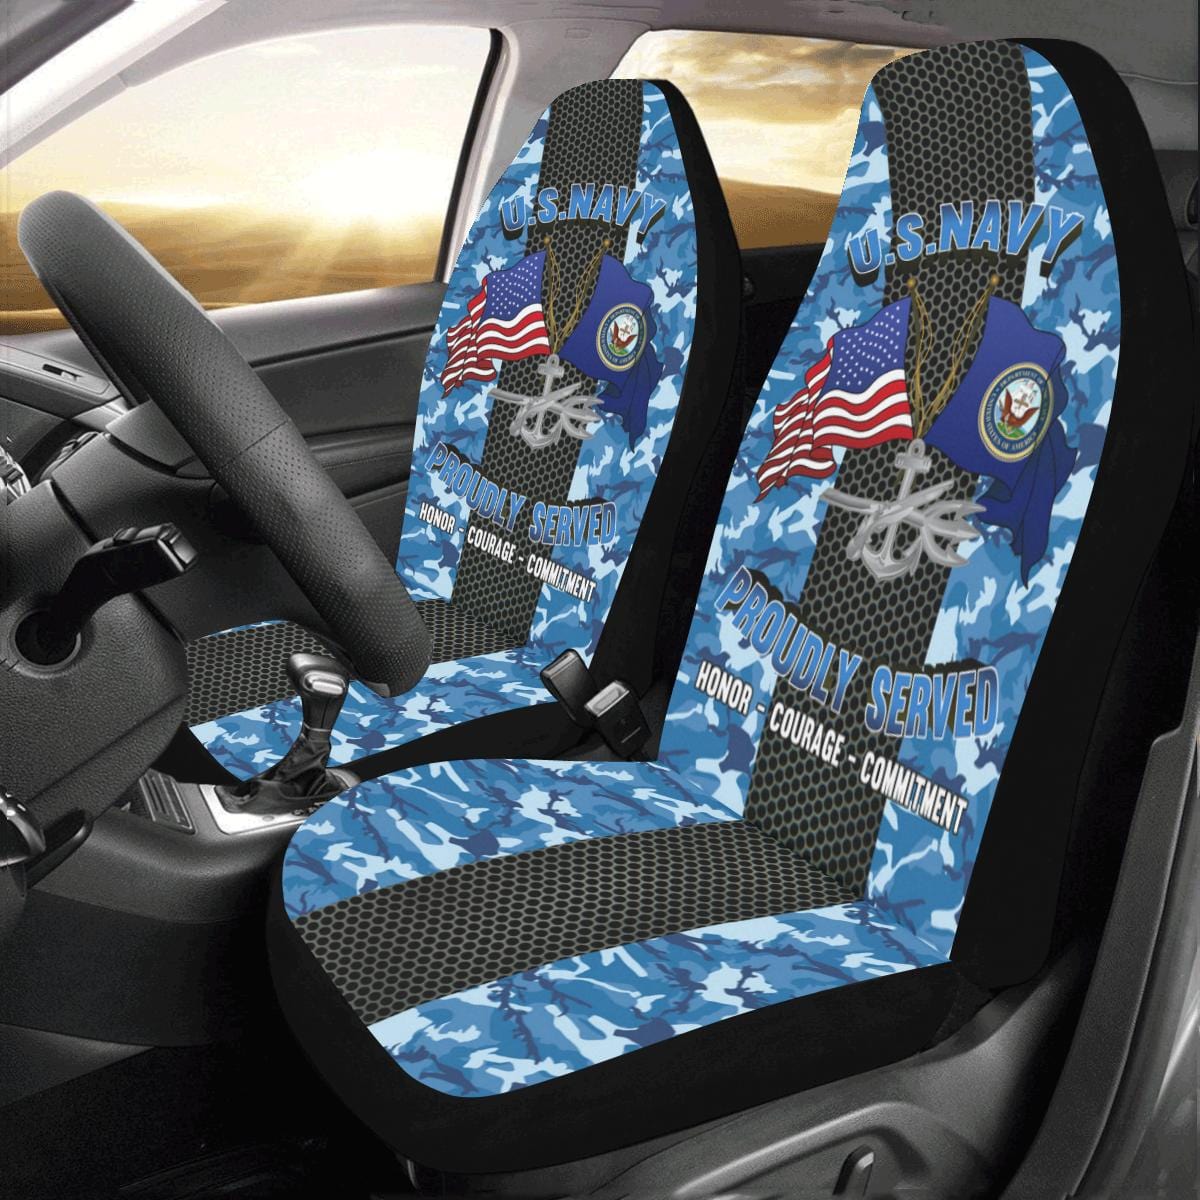 Navy Special Warfare Operator Navy SO Car Seat Covers (Set of 2)-SeatCovers-Navy-Rate-Veterans Nation